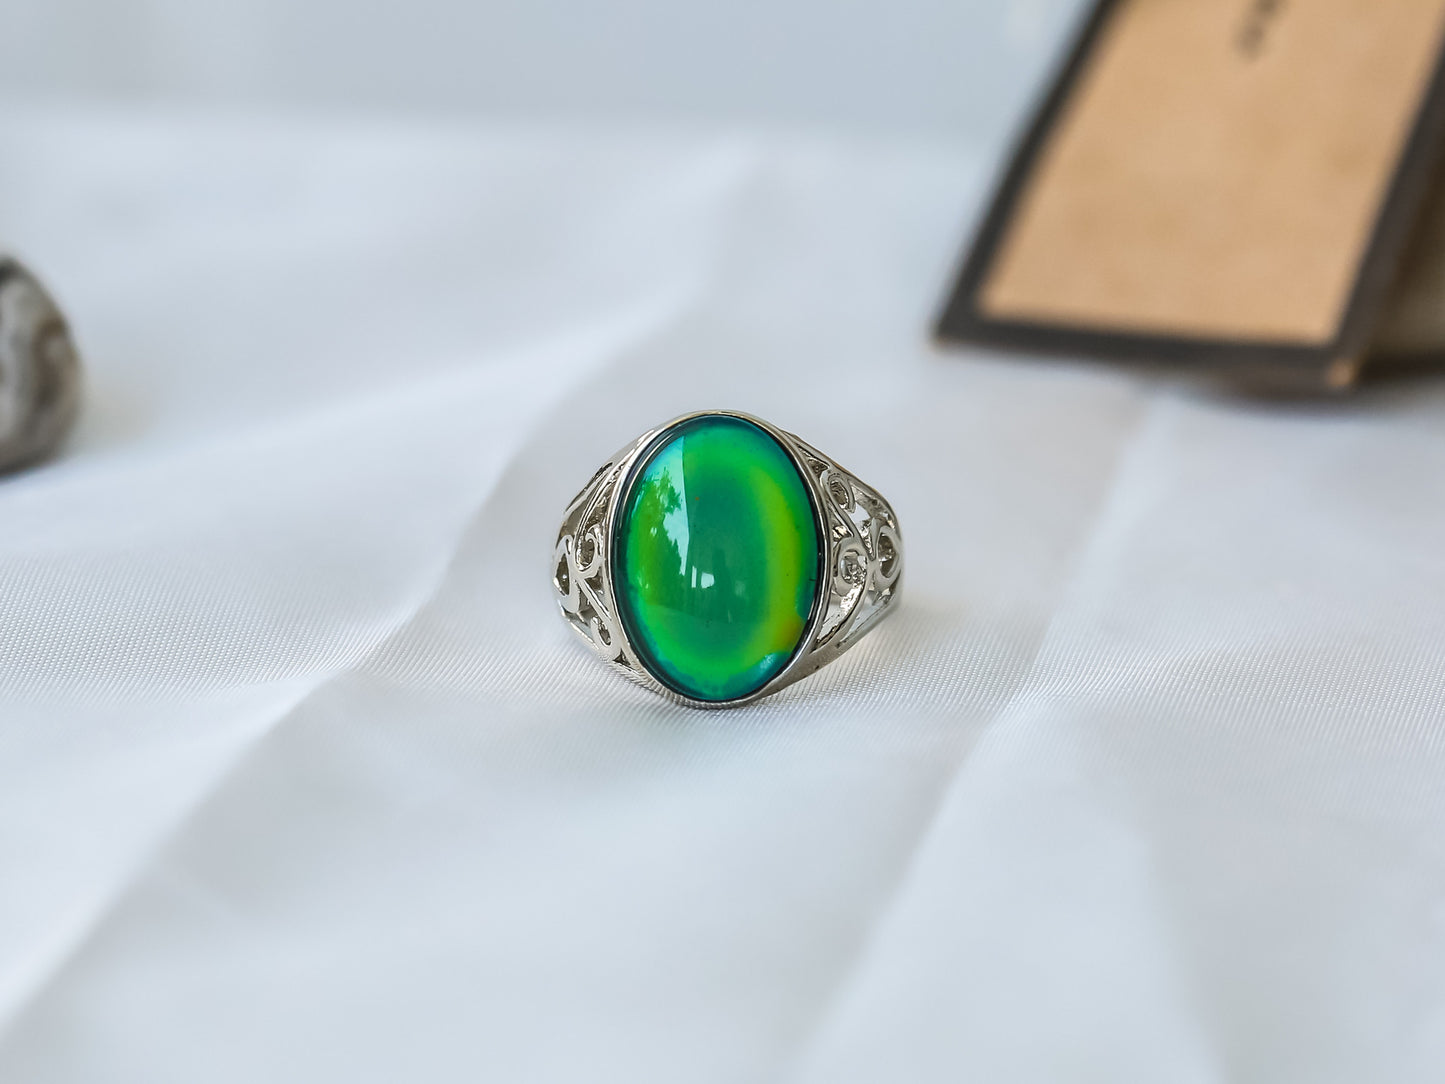 Limited Edition Oval Stone Mood Ring.